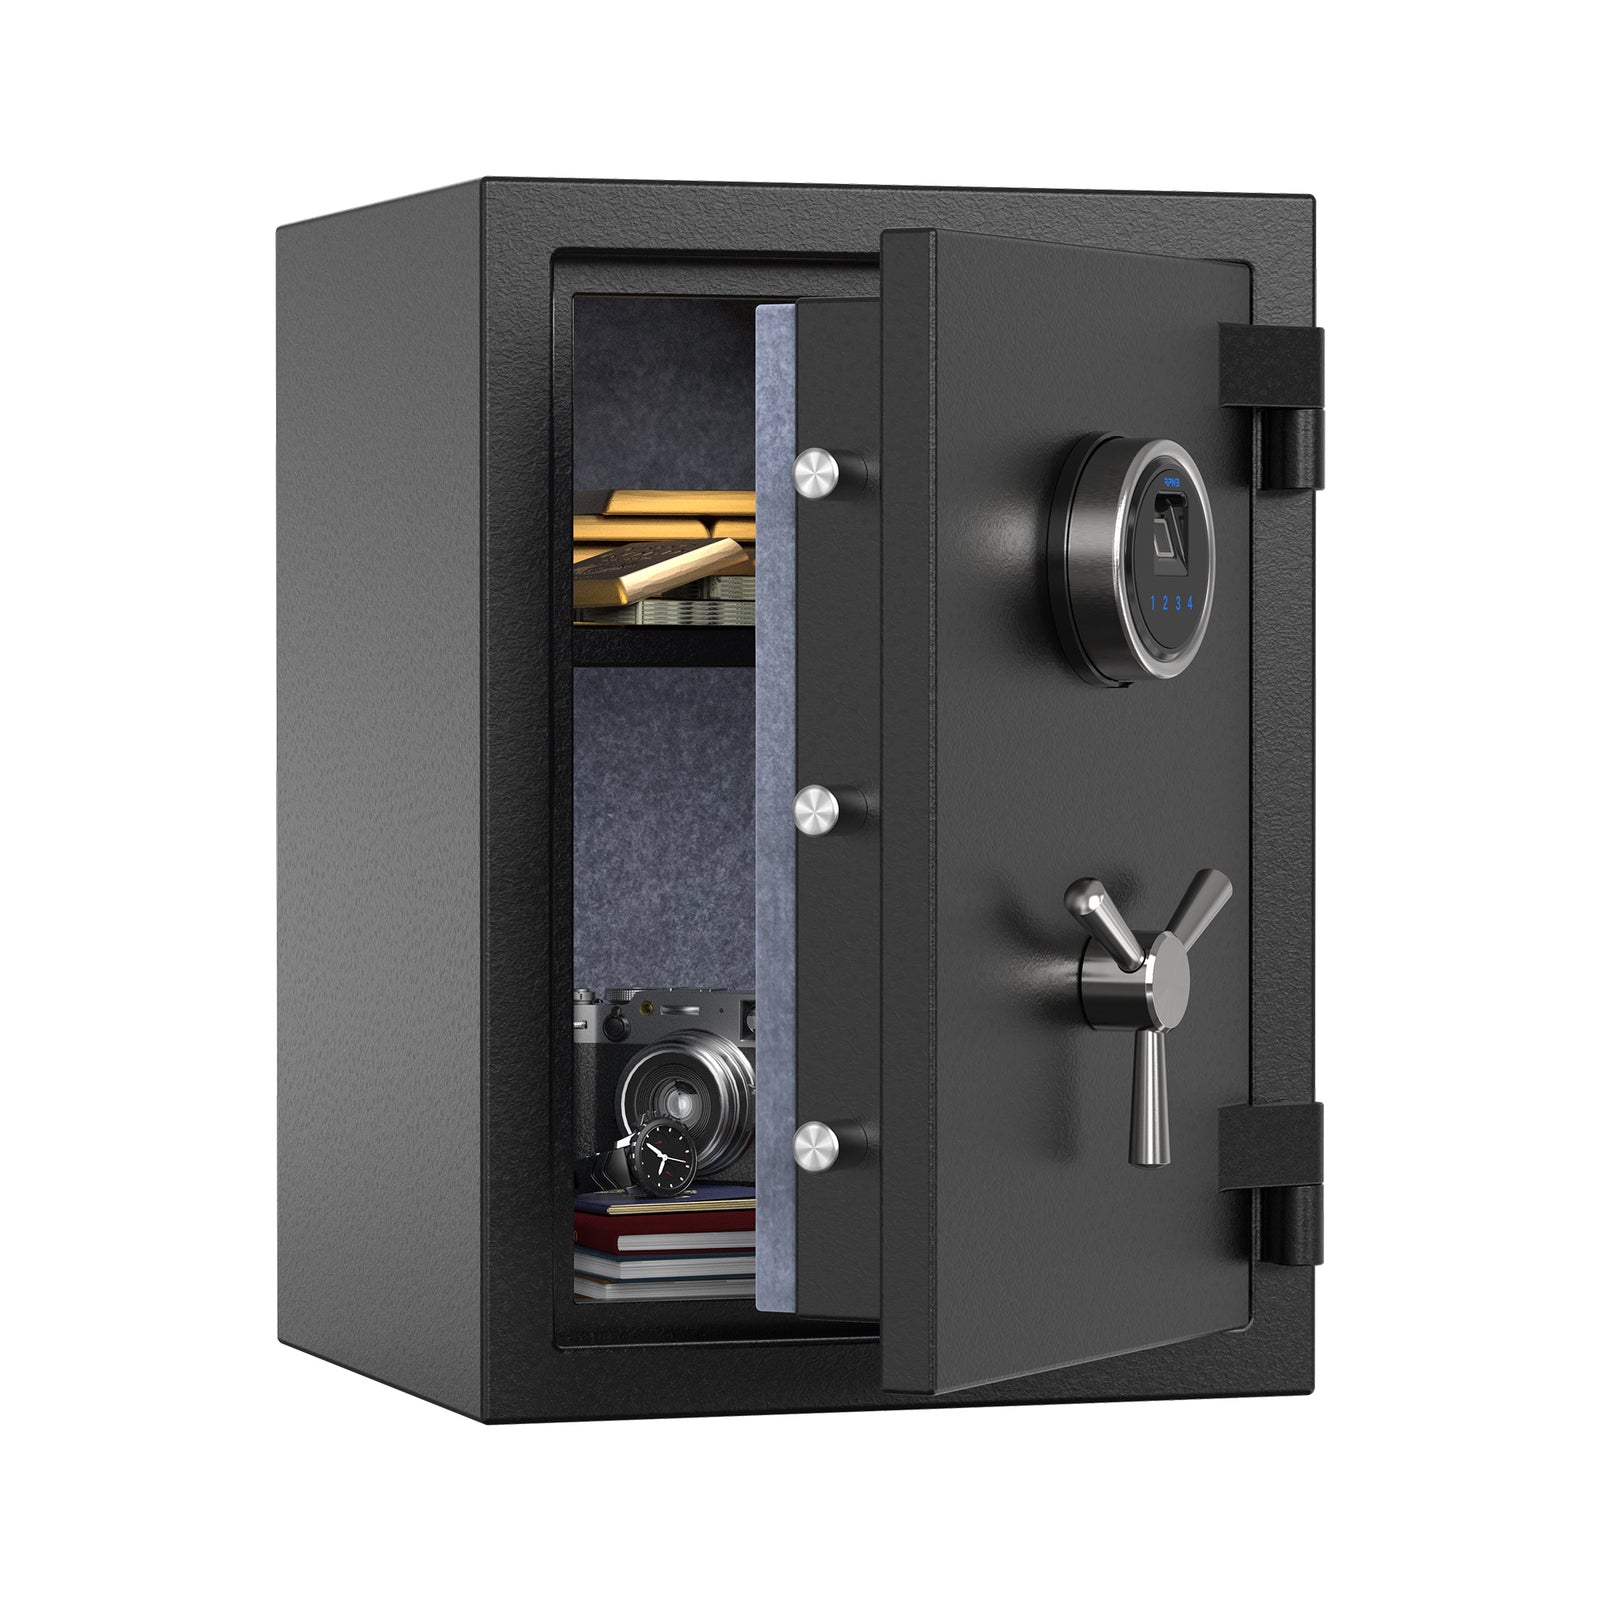 RPNB RPFS50 Deluxe Biometric Fireproof Safe with Touch Screen Keypad